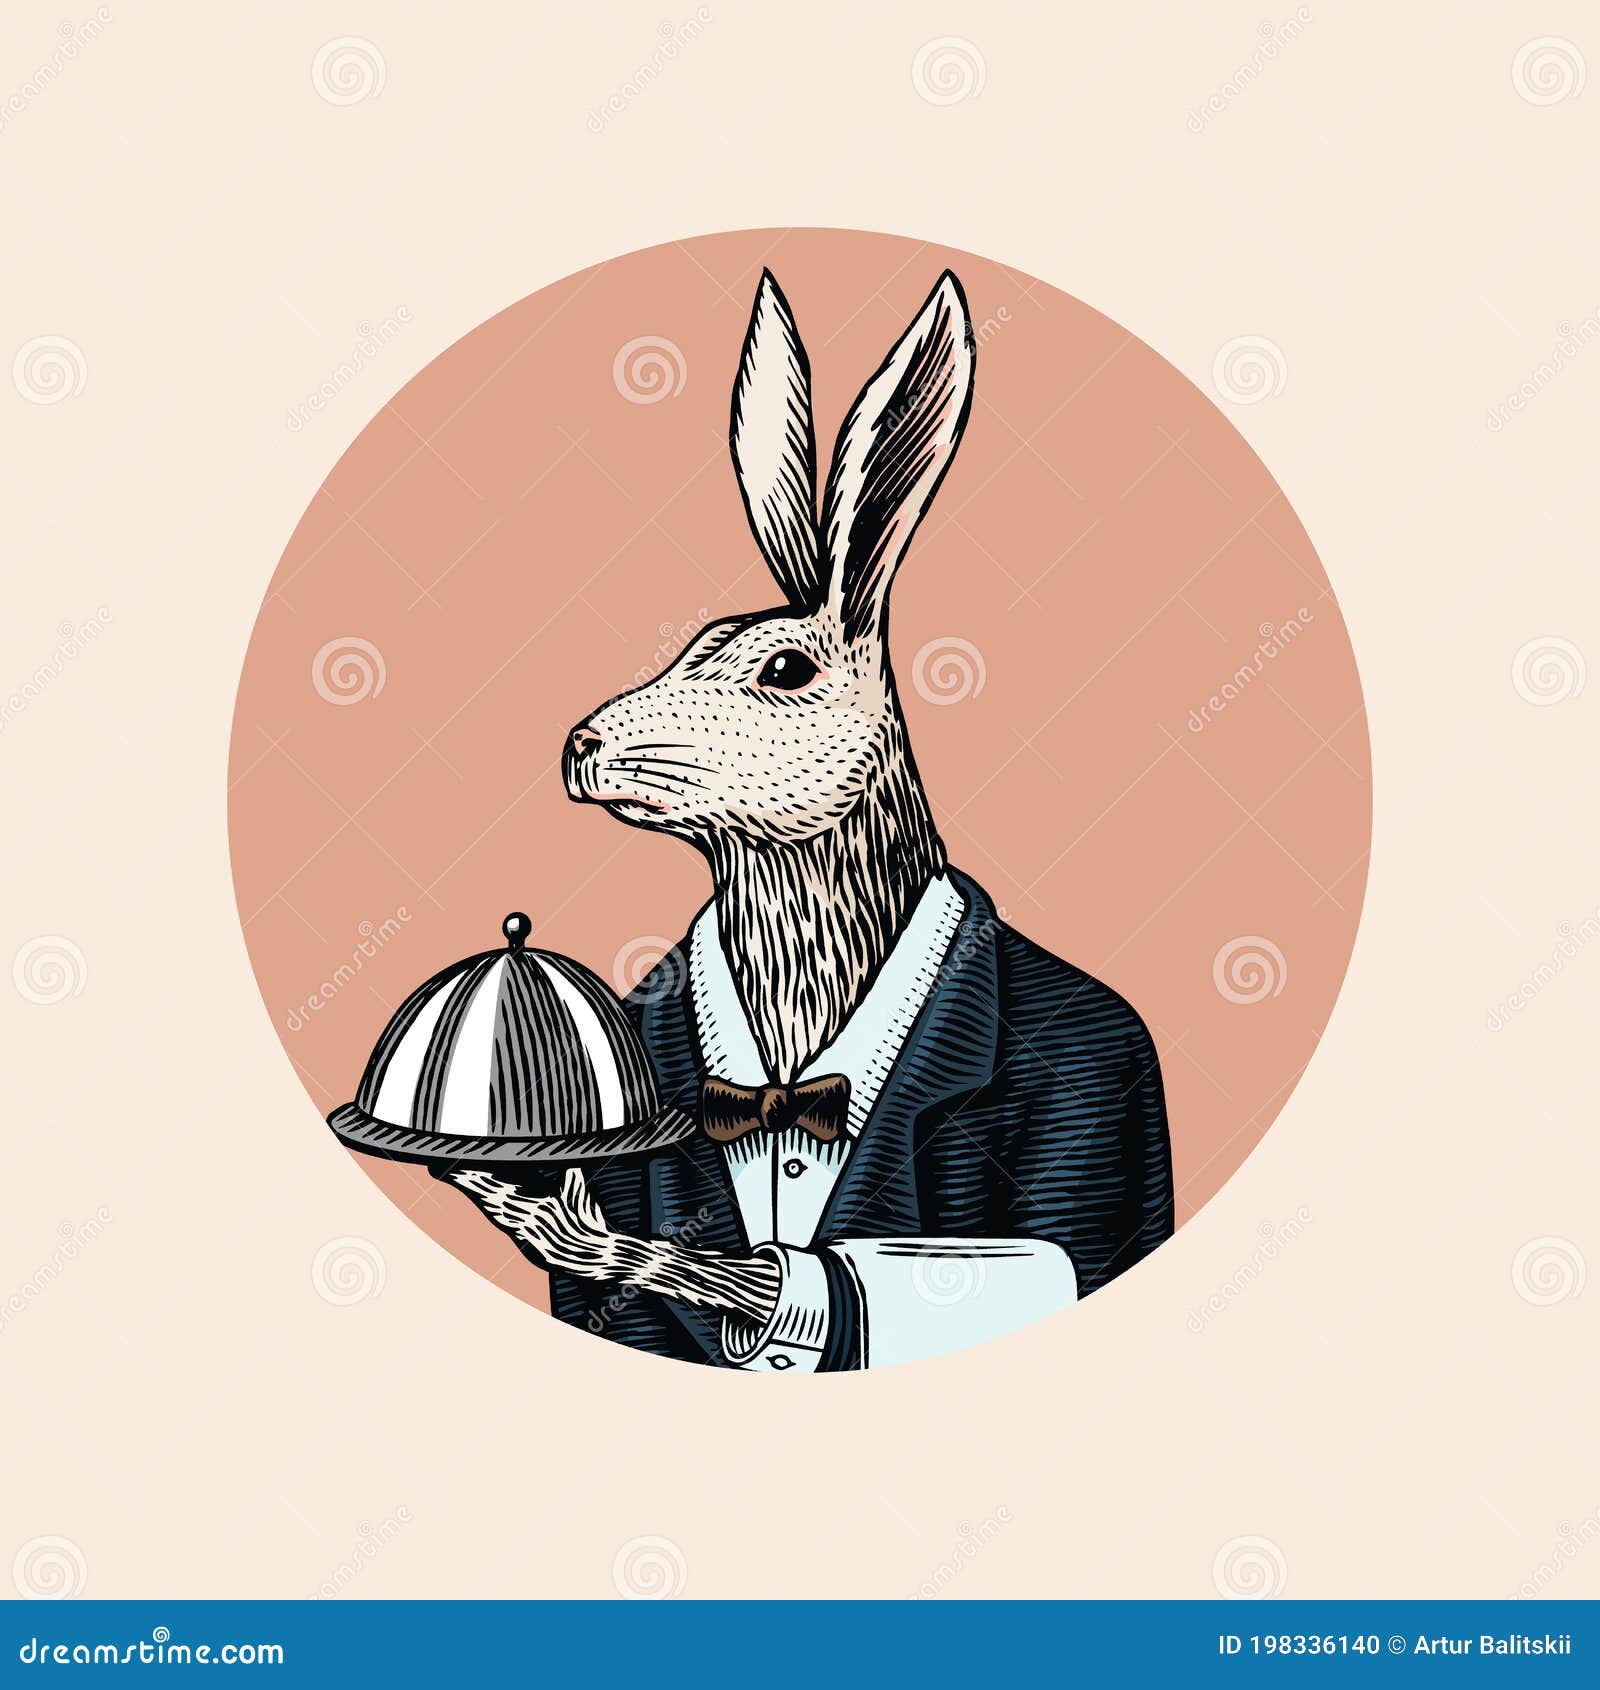 hare waiter with a dish. rabbit flunky or garcon. fashion animal character. hand drawn sketch.  engraved